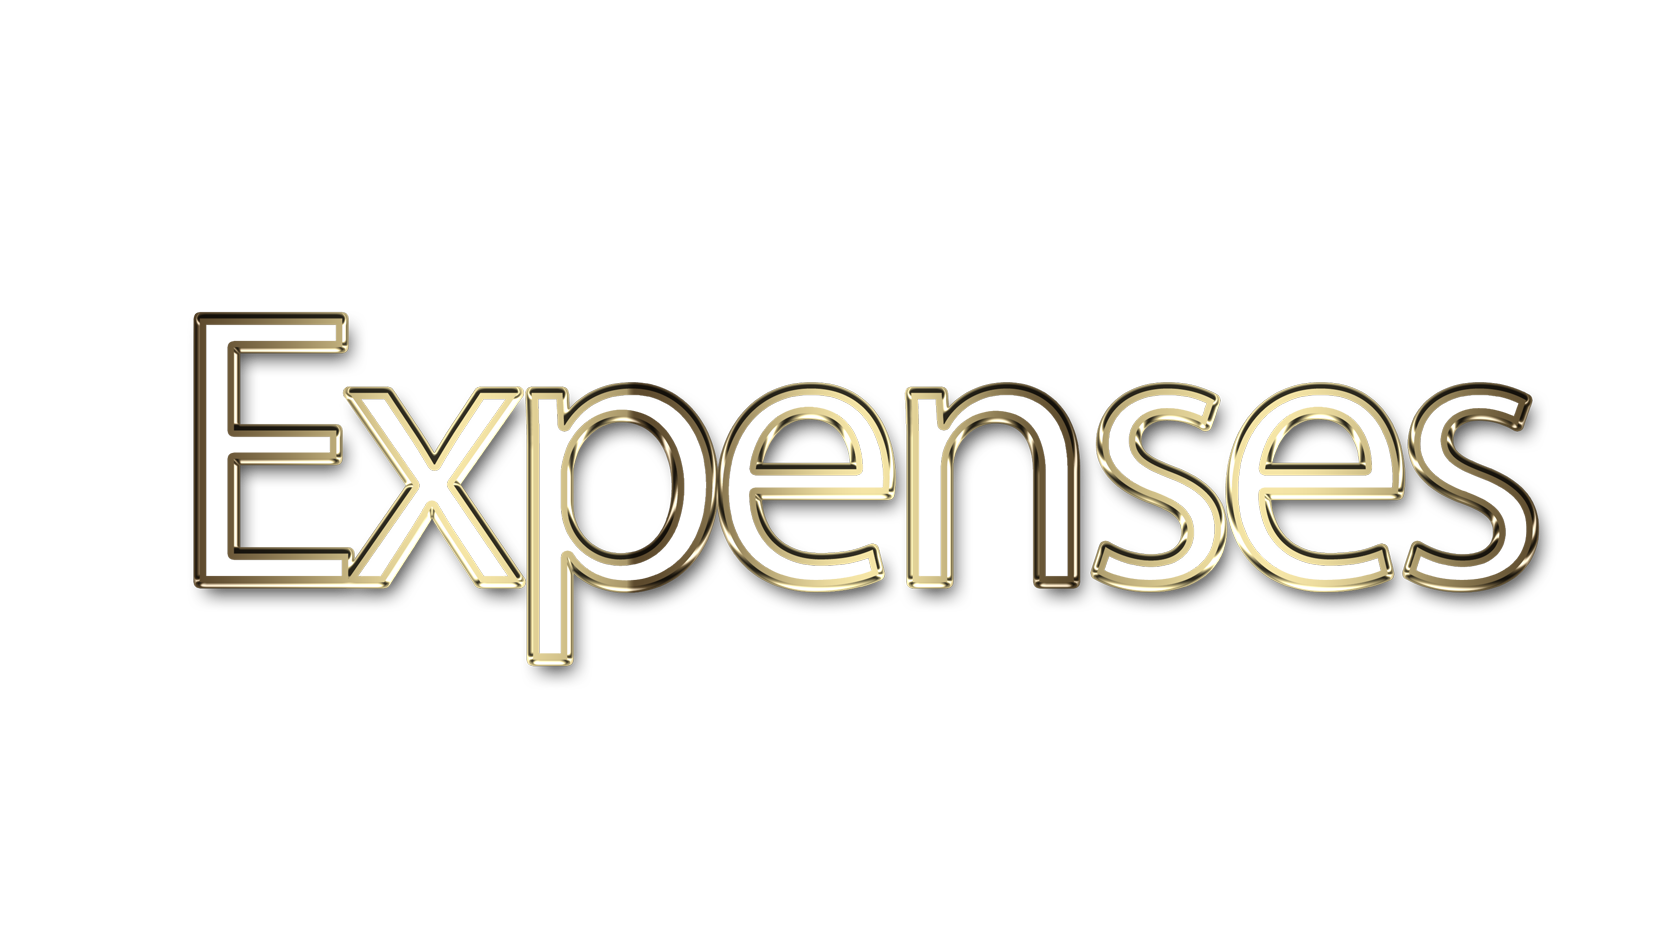 Expenses png, word Expenses png, Expenses word png, Expenses text png, Expenses letters png, Expenses word art typography PNG images, transparent png